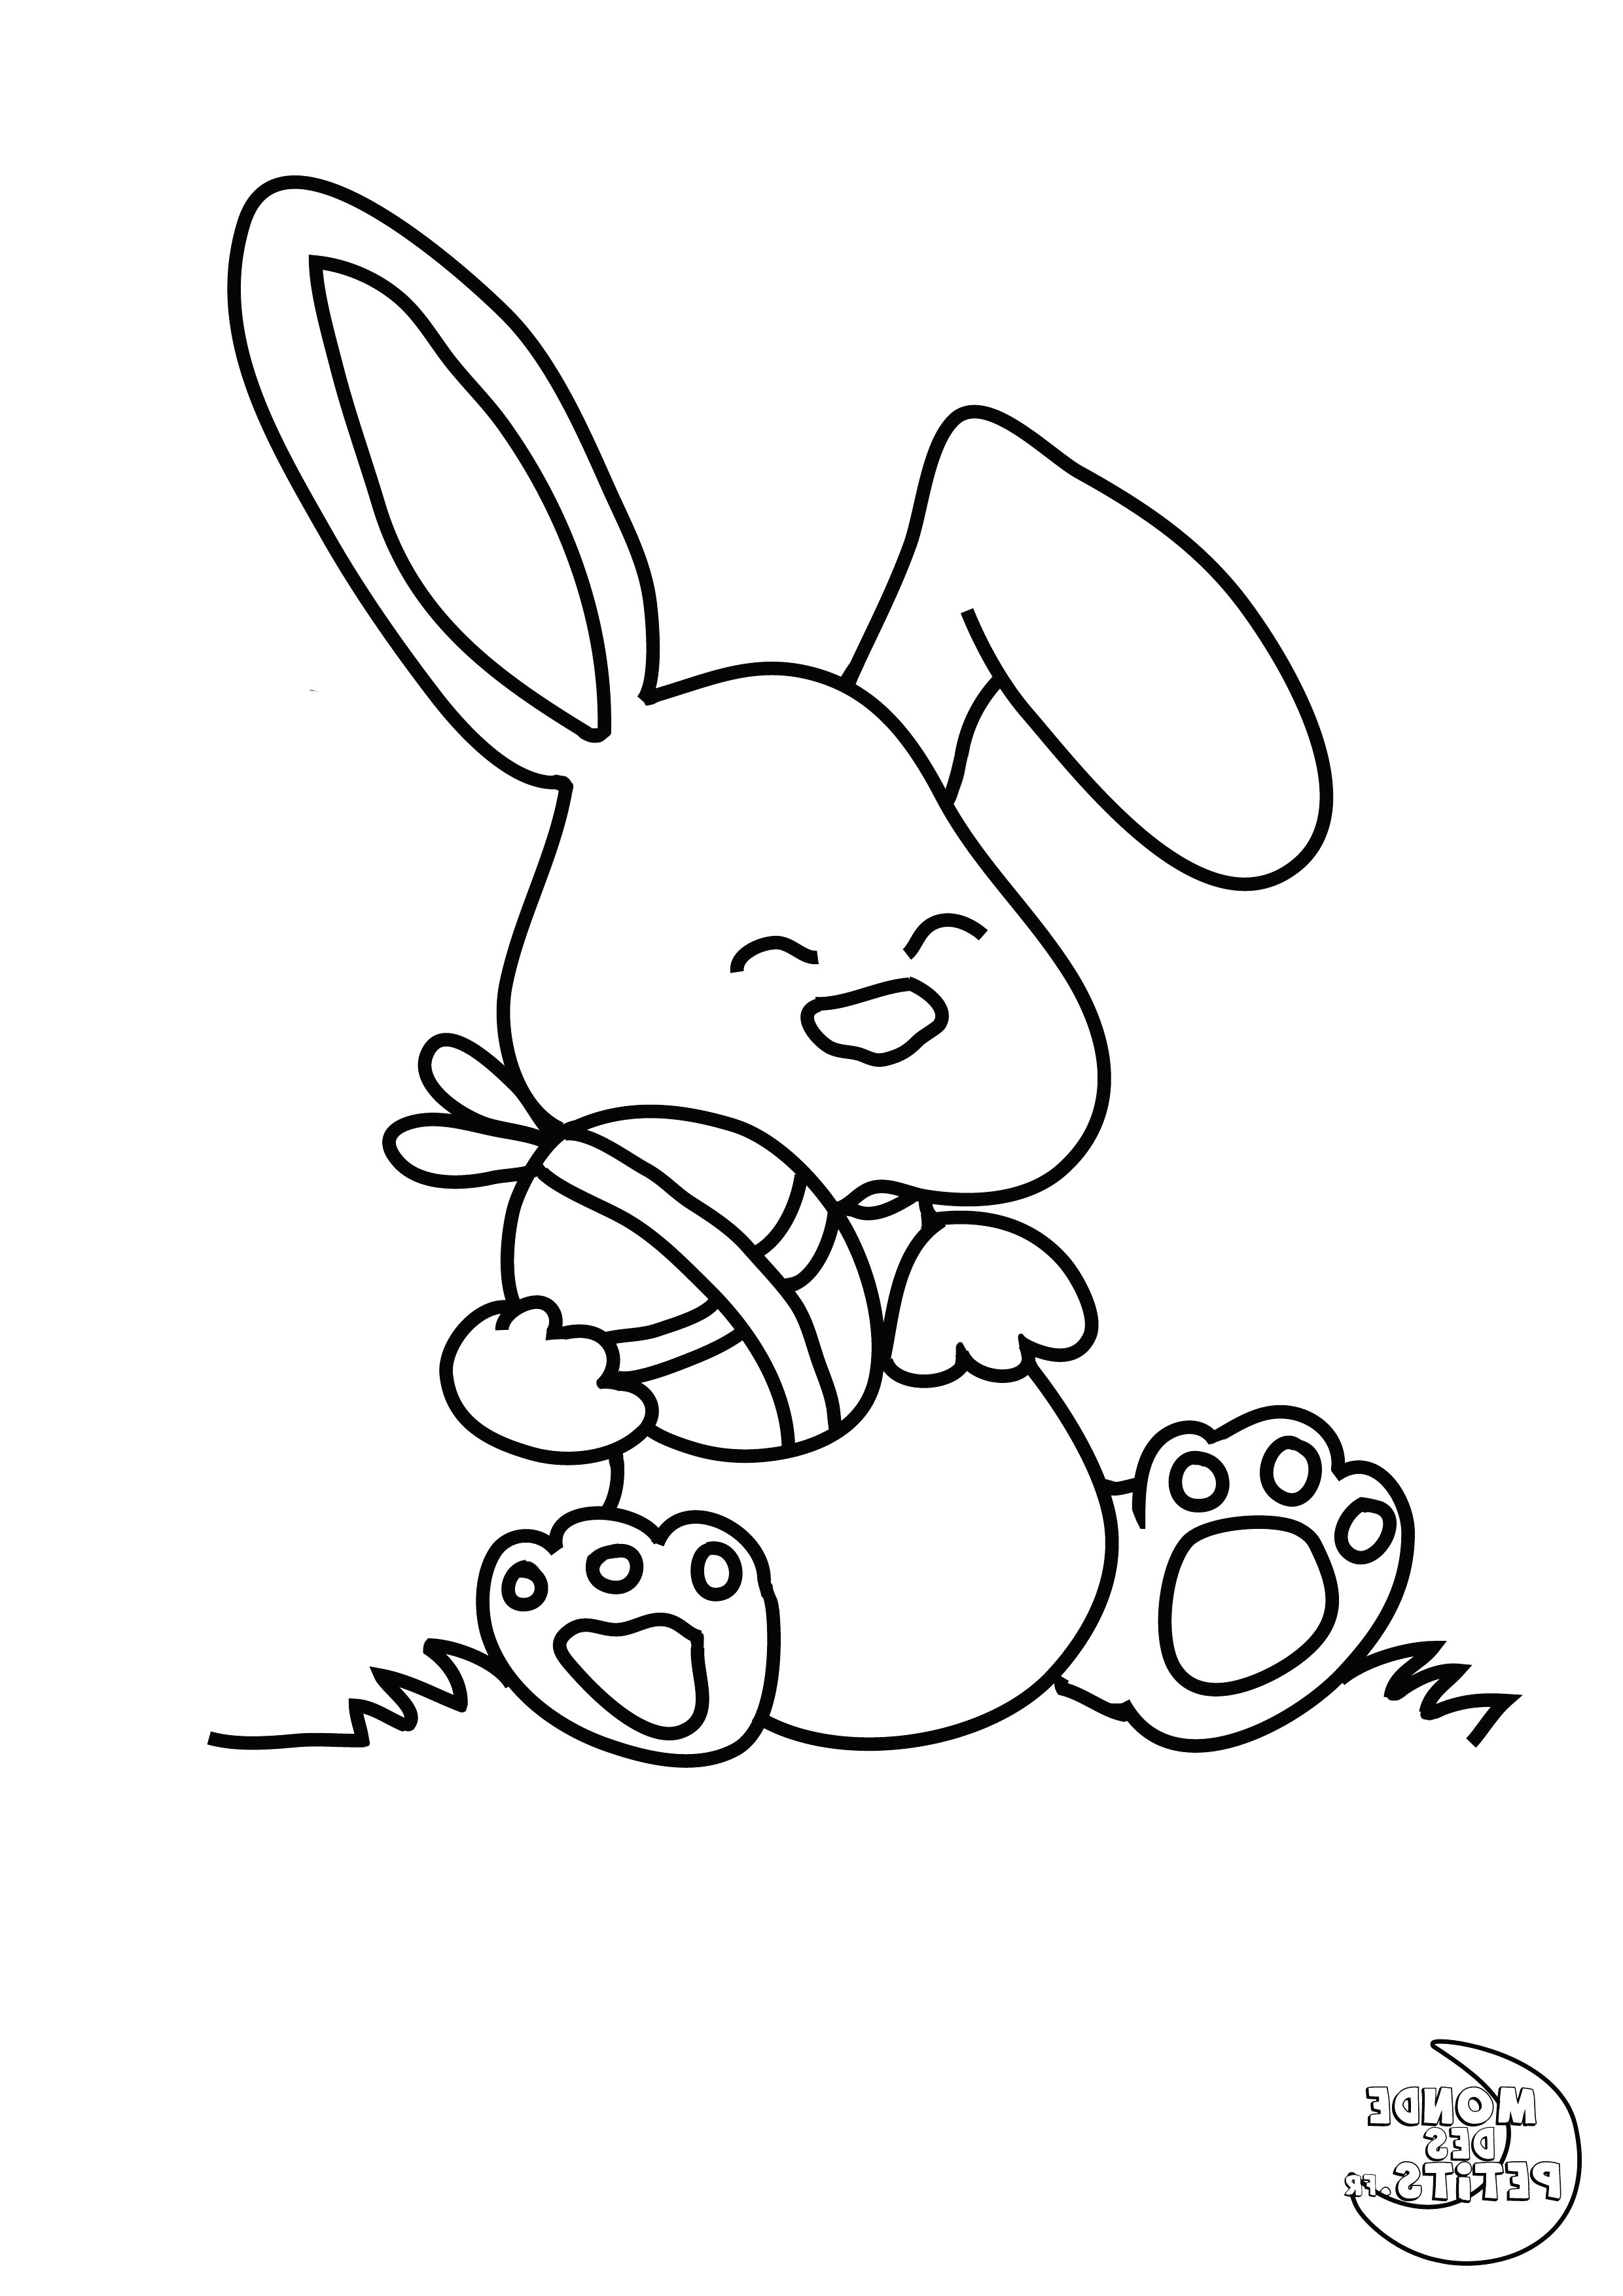 Dessin Facile De Lapin Bestof Images Coloriage Lapin Awesome